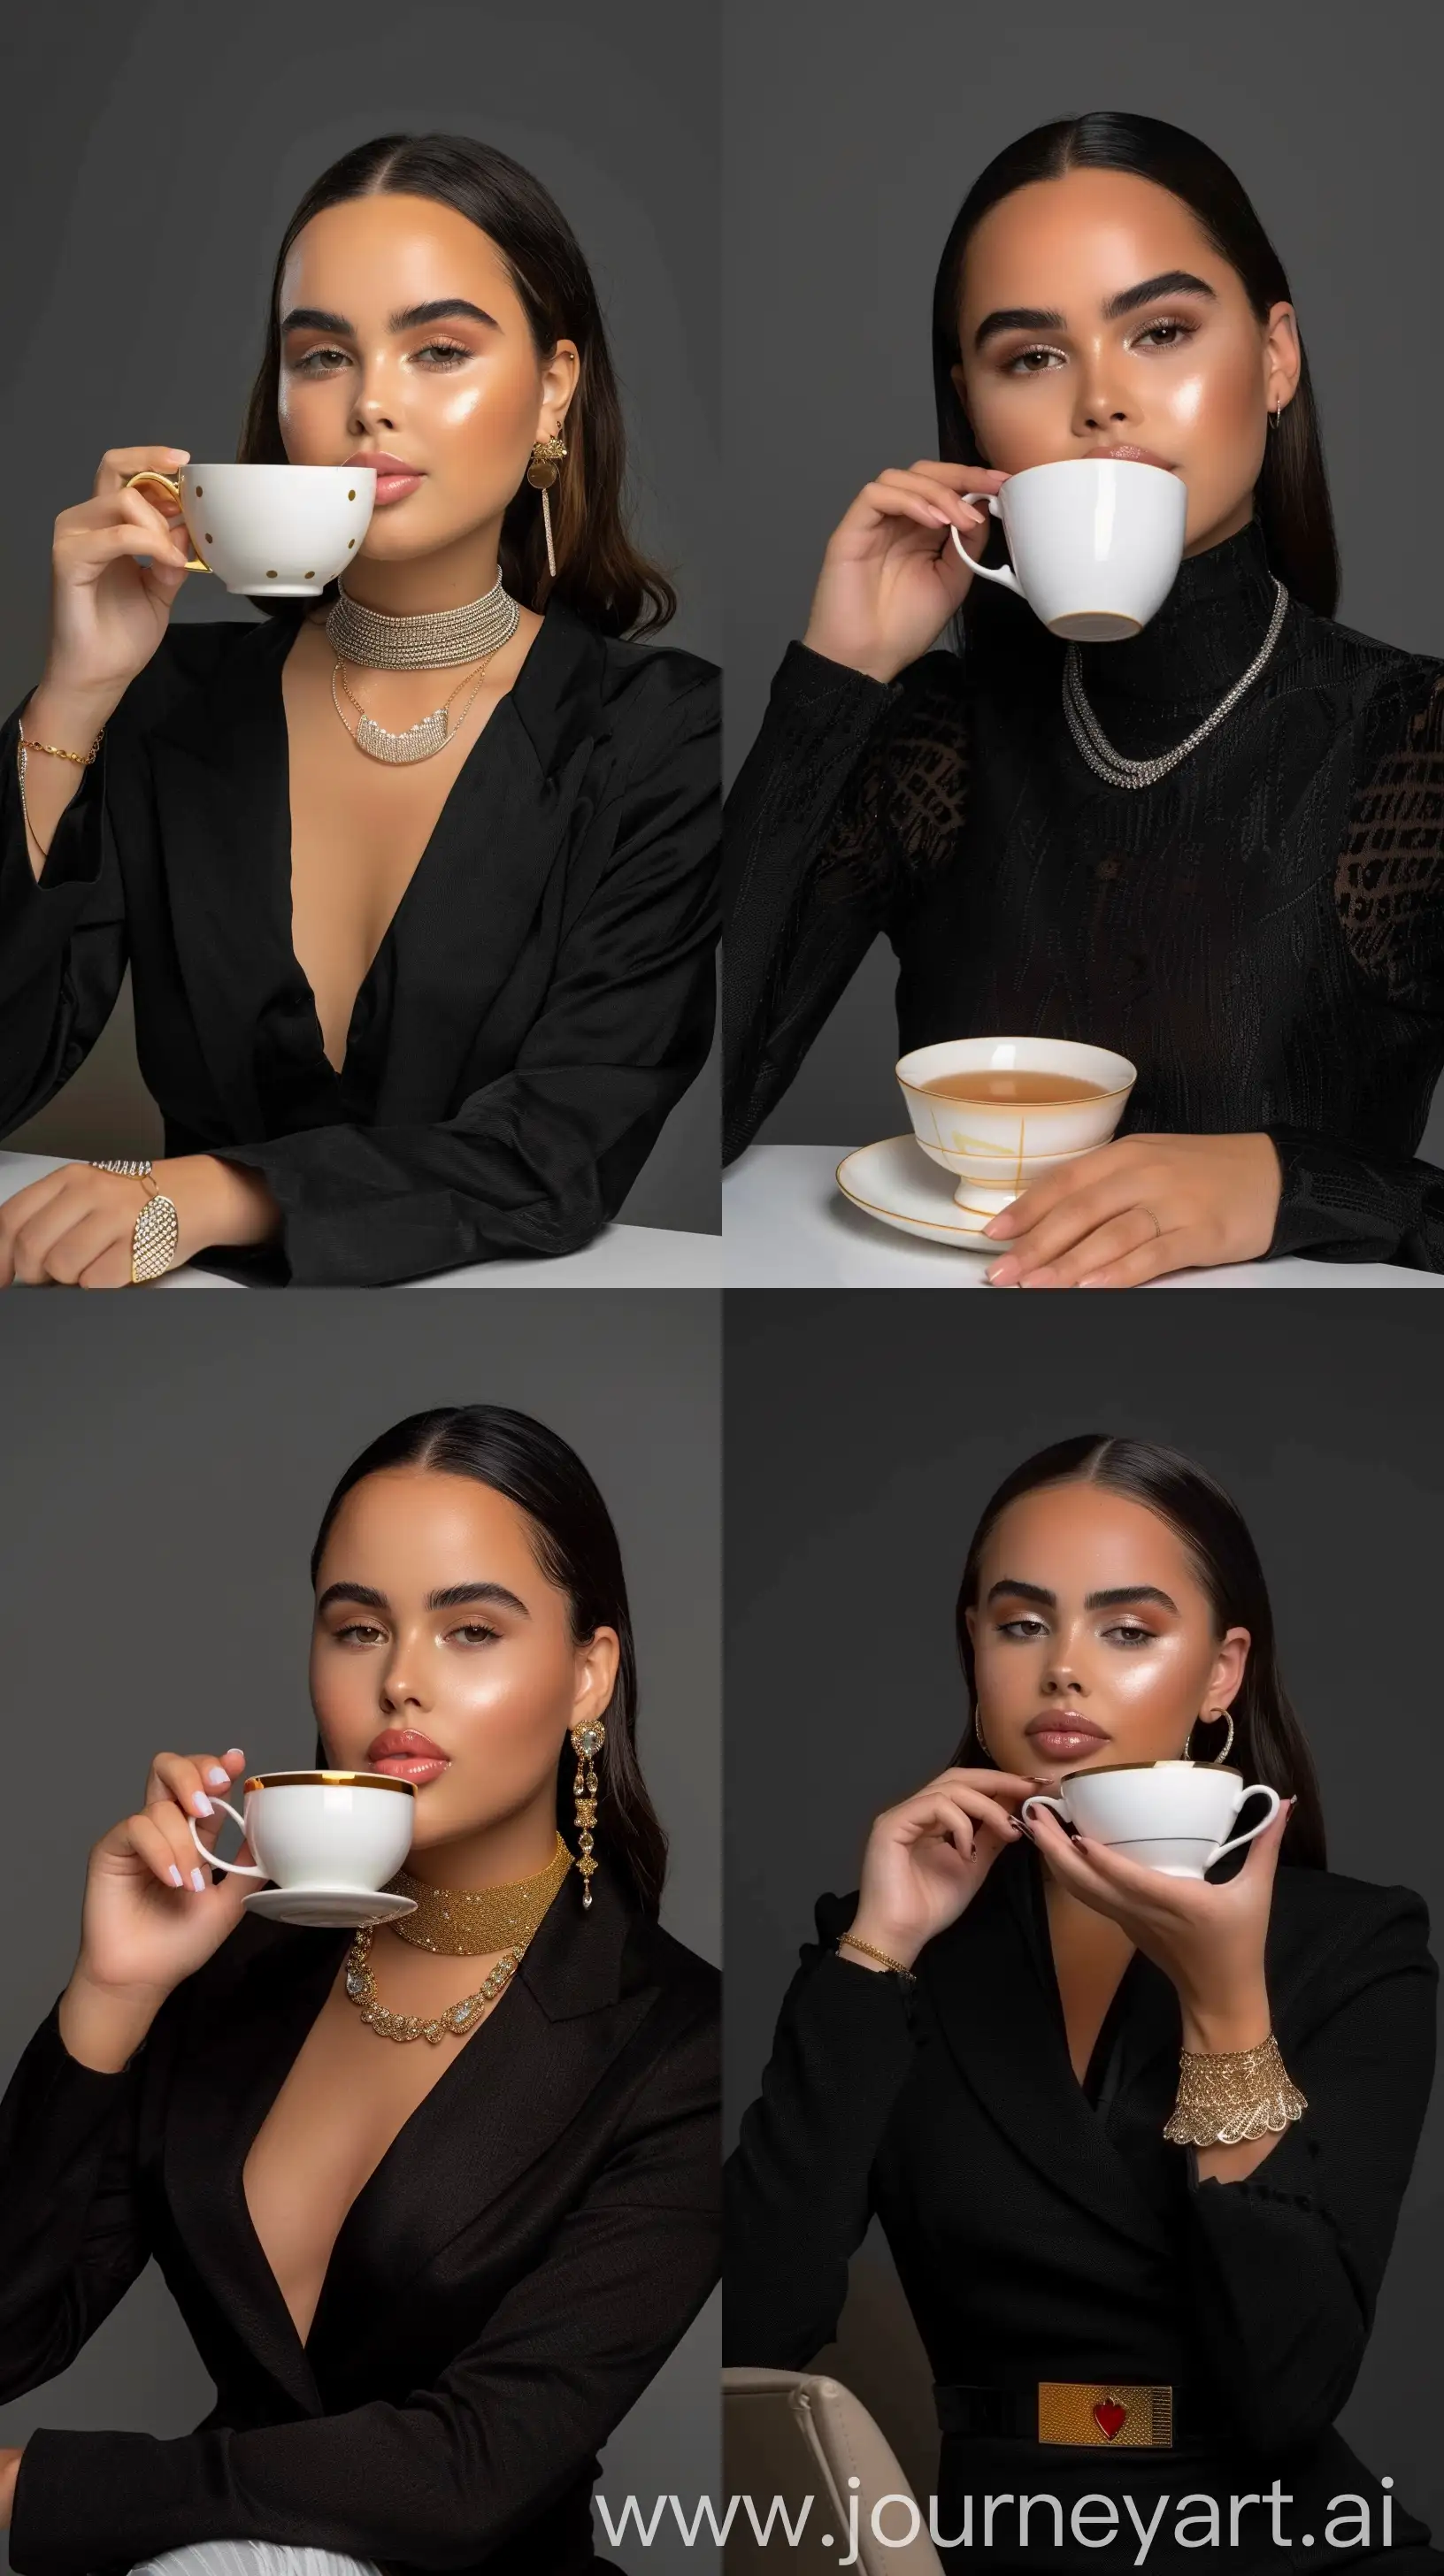 a medium shot of An elegantly dressed woman sipping a cup of tea in a studio photo, boss poses --cref https://cdn.discordapp.com/attachments/997271750368833636/1222271417341448372/expert_upscayl_4x_realesrgan-x4plus.png?ex=66159bf6&is=660326f6&hm=fd529ad60032841a143c643f35d7df741f1871c8aab34df177eaea3bf4865b9c& --sref https://i.pinimg.com/564x/e3/a4/ca/e3a4caf3872ee031b32a7844ae0c74ab.jpg --style raw --ar 9:16 --v 6 --cw 0